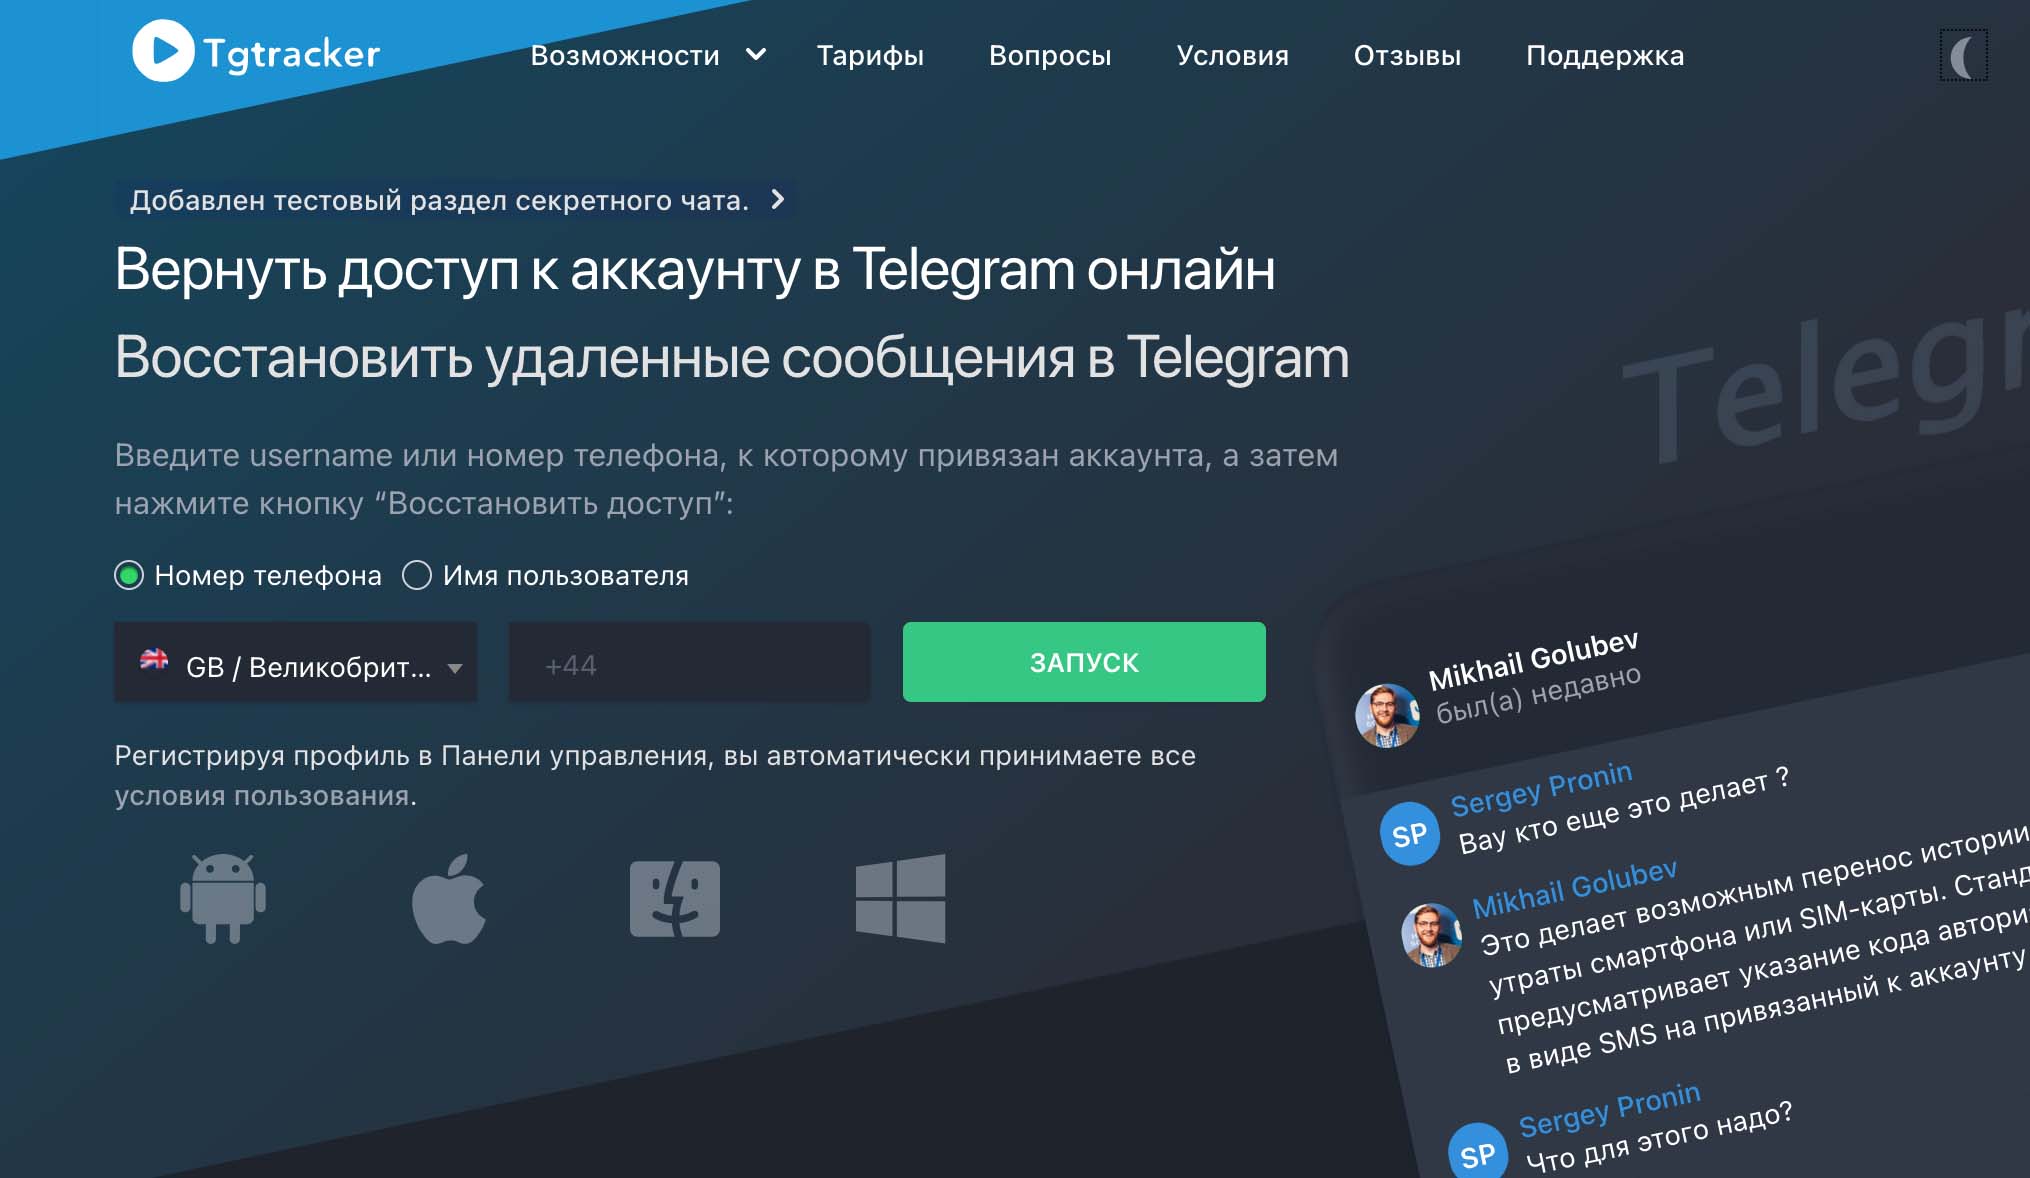 How to use Tgtracker to track user's Telegram activity